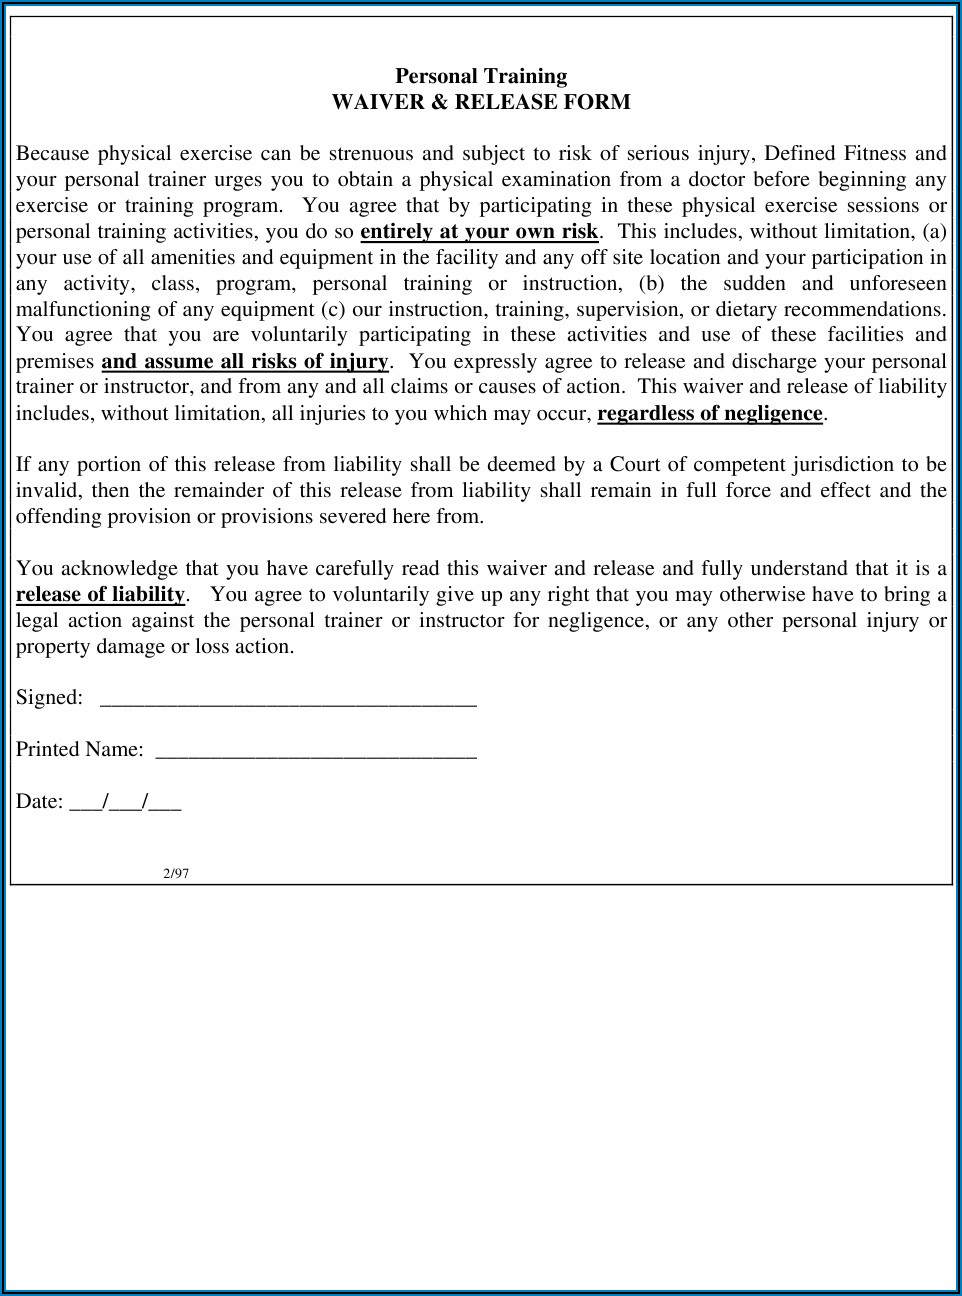 Waiver And Release Form For Exercise